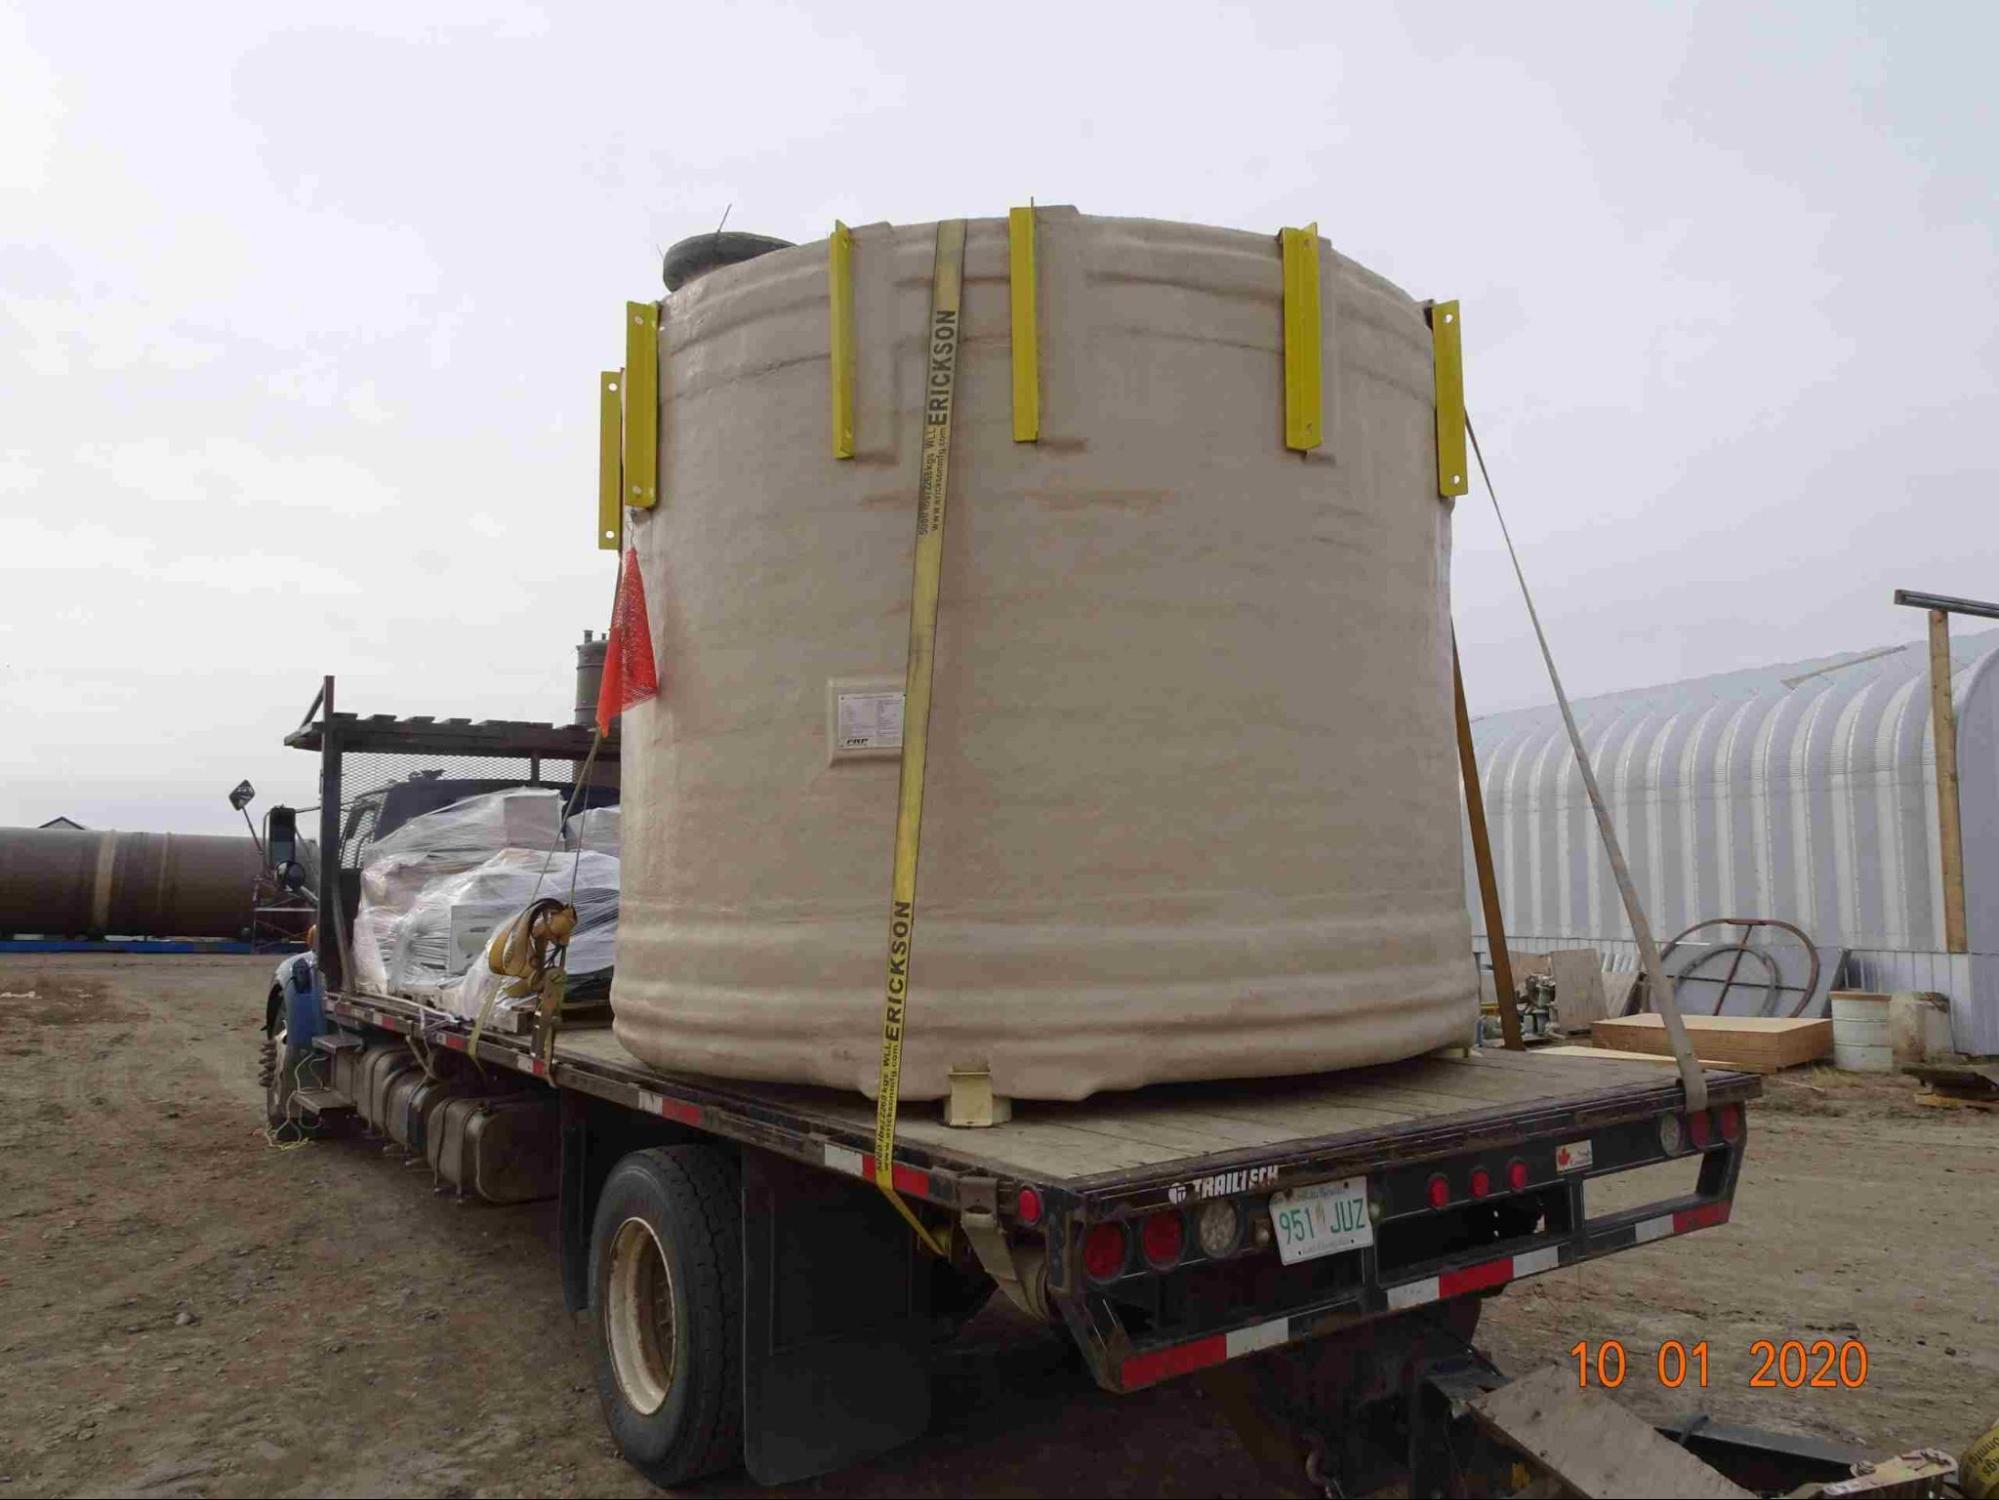 A fiberglass tank was tied and covered safely in a trailer truck.